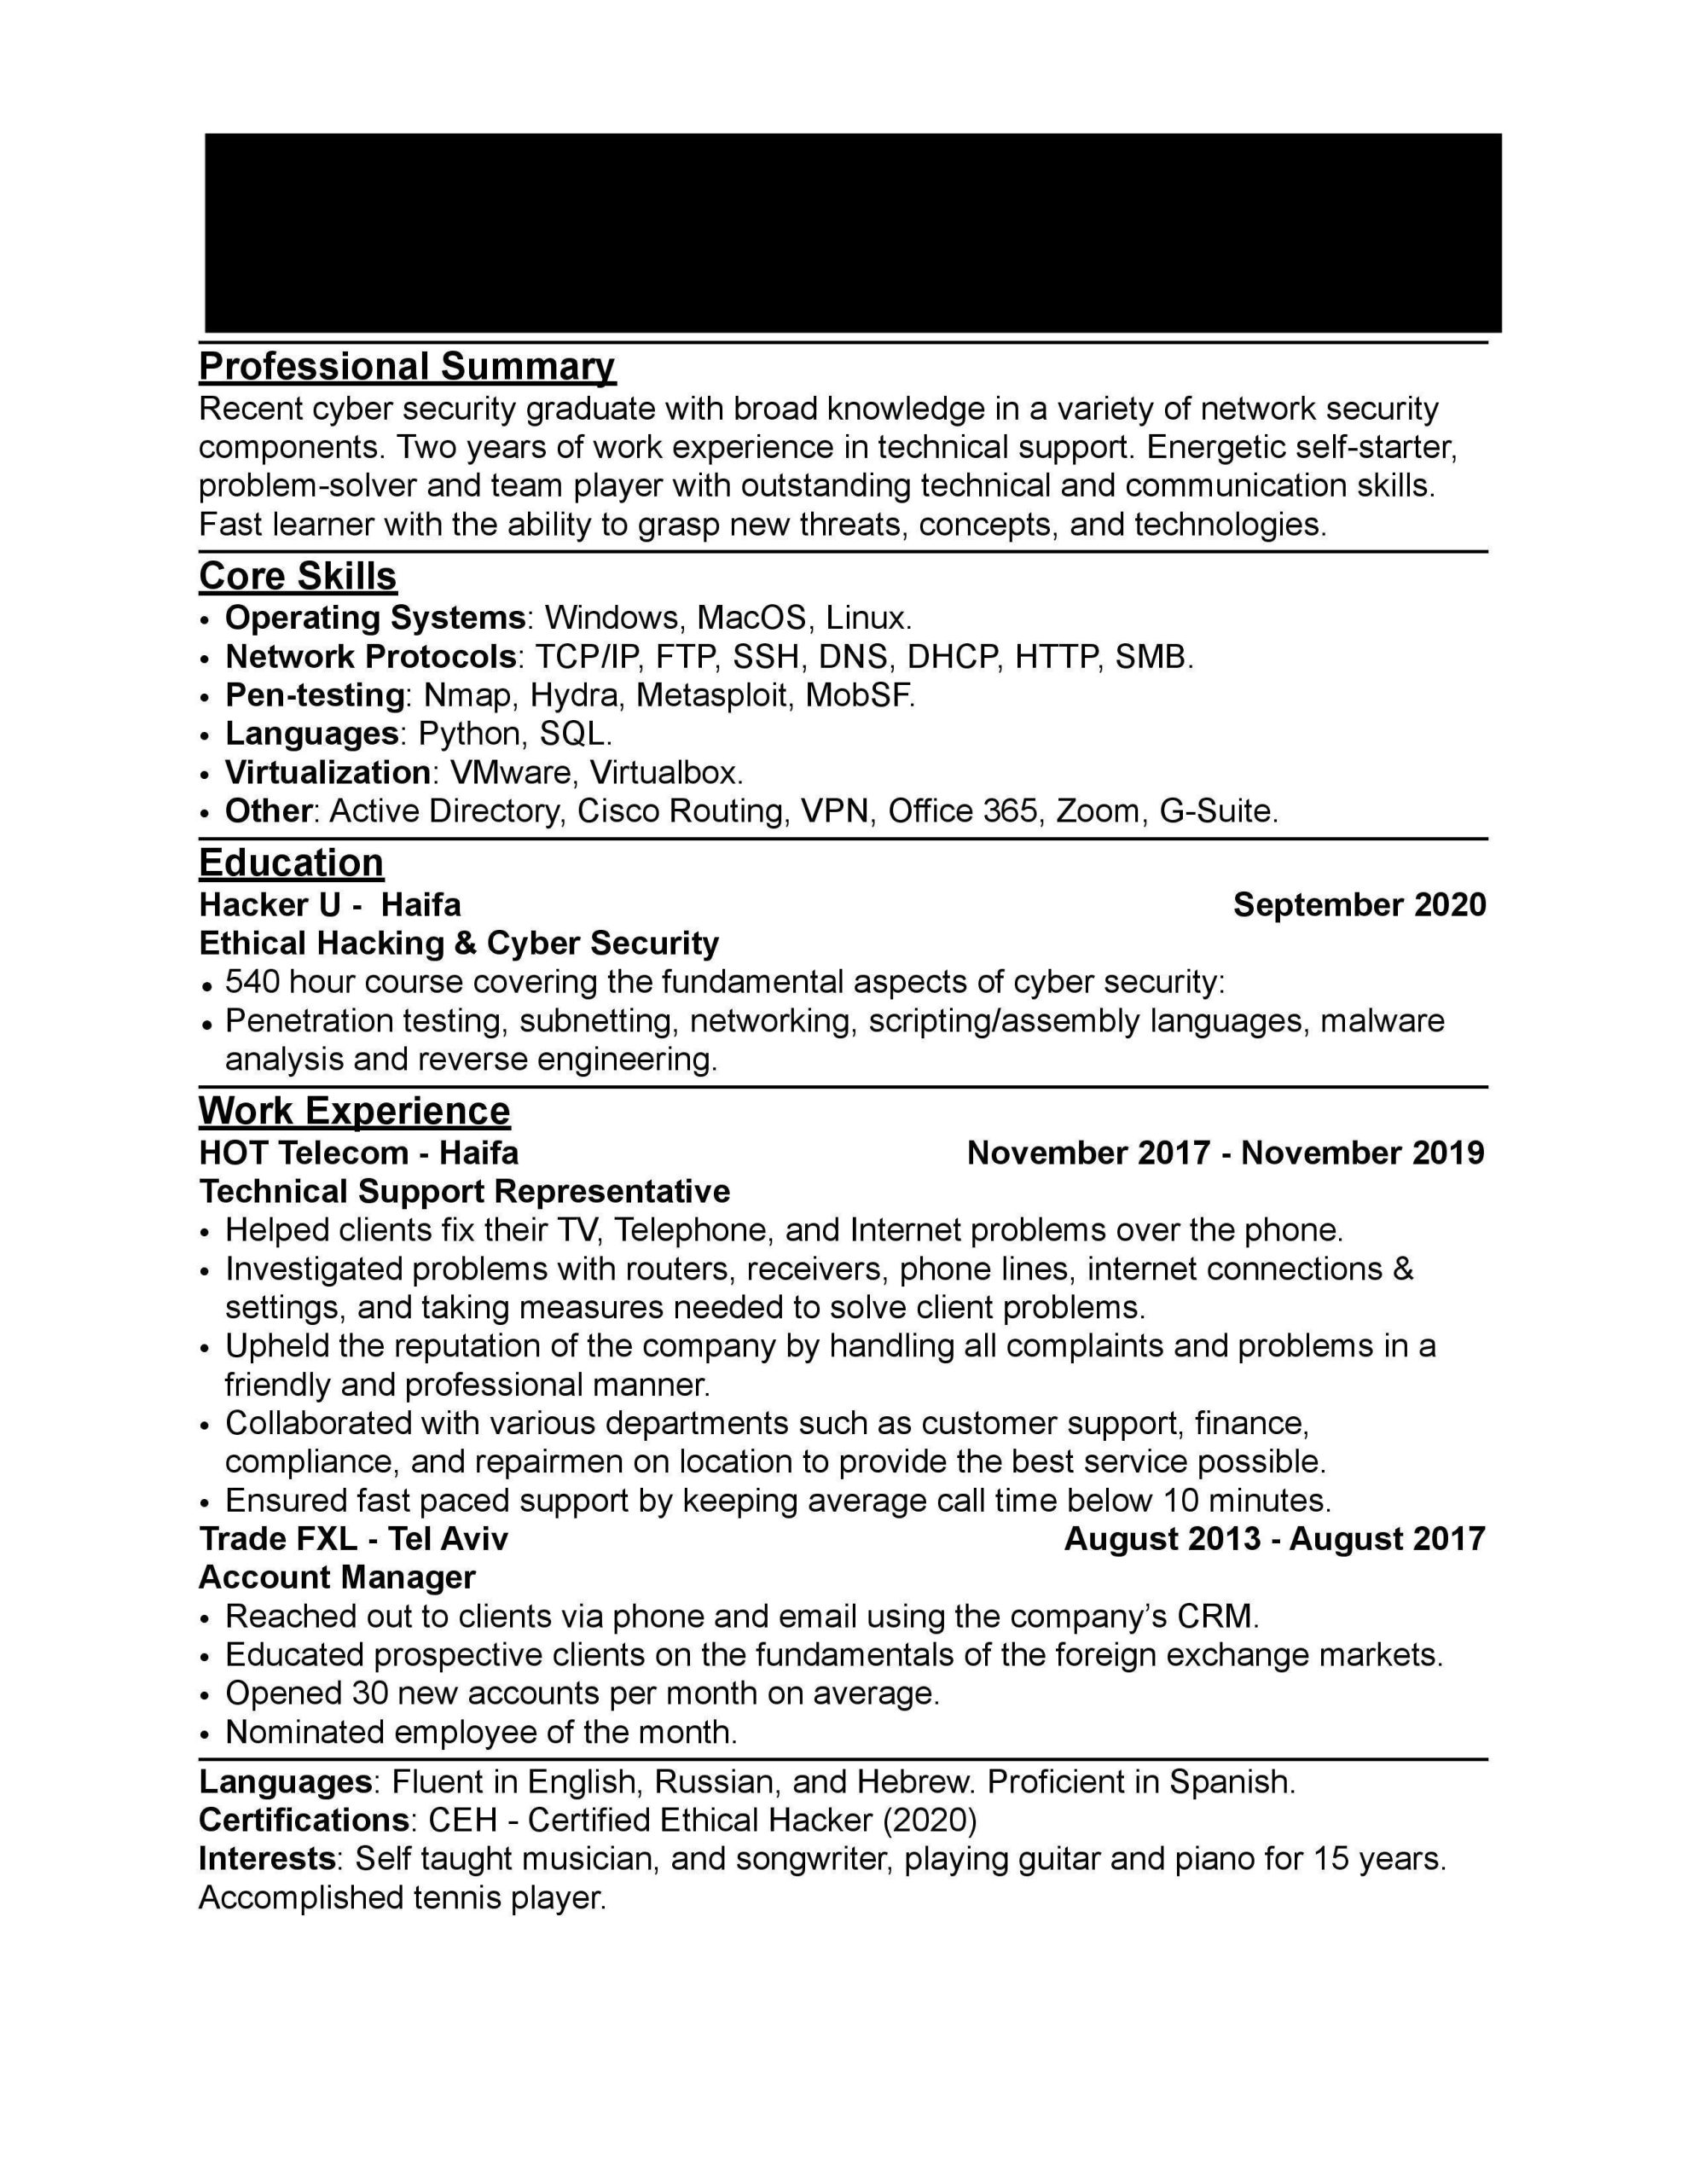 Sample Resume for Security Officer with No Experience How Does My Entry Level Cyber Security Resume Look? : R …